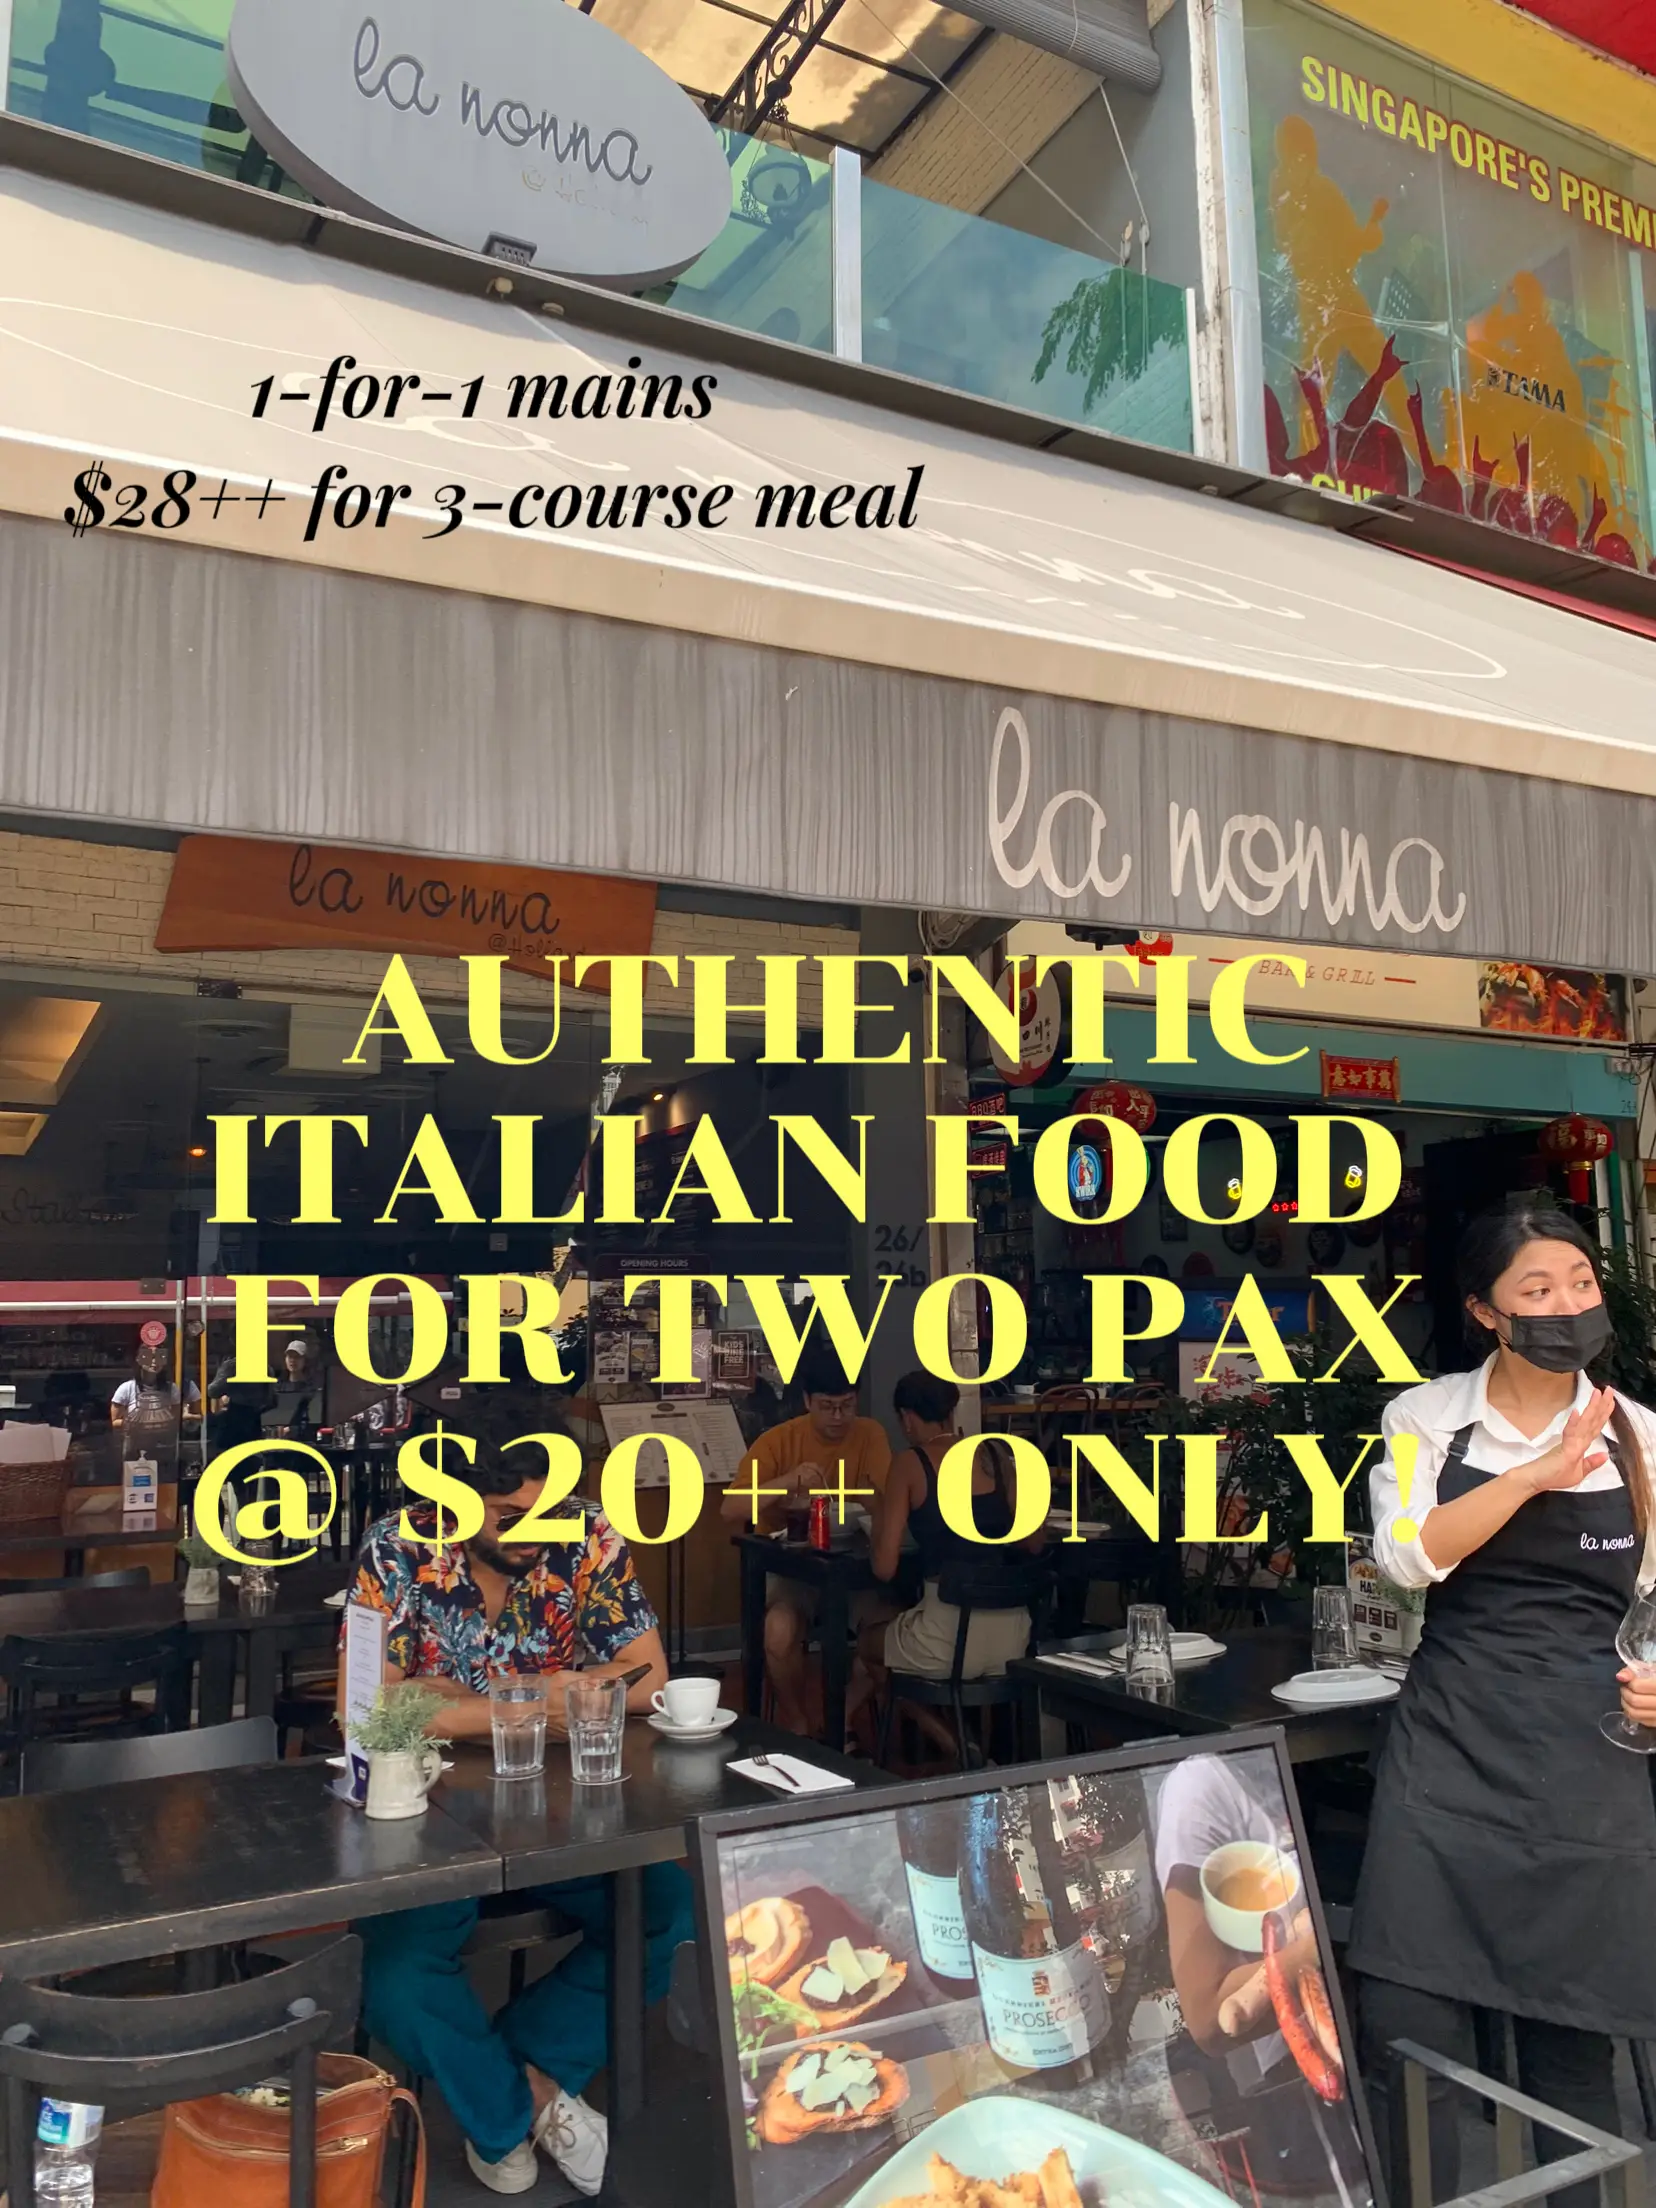 AUTHENTIC ITALIAN FOOD FOR TWO PAX@ $20++ ONLY! 's images(0)